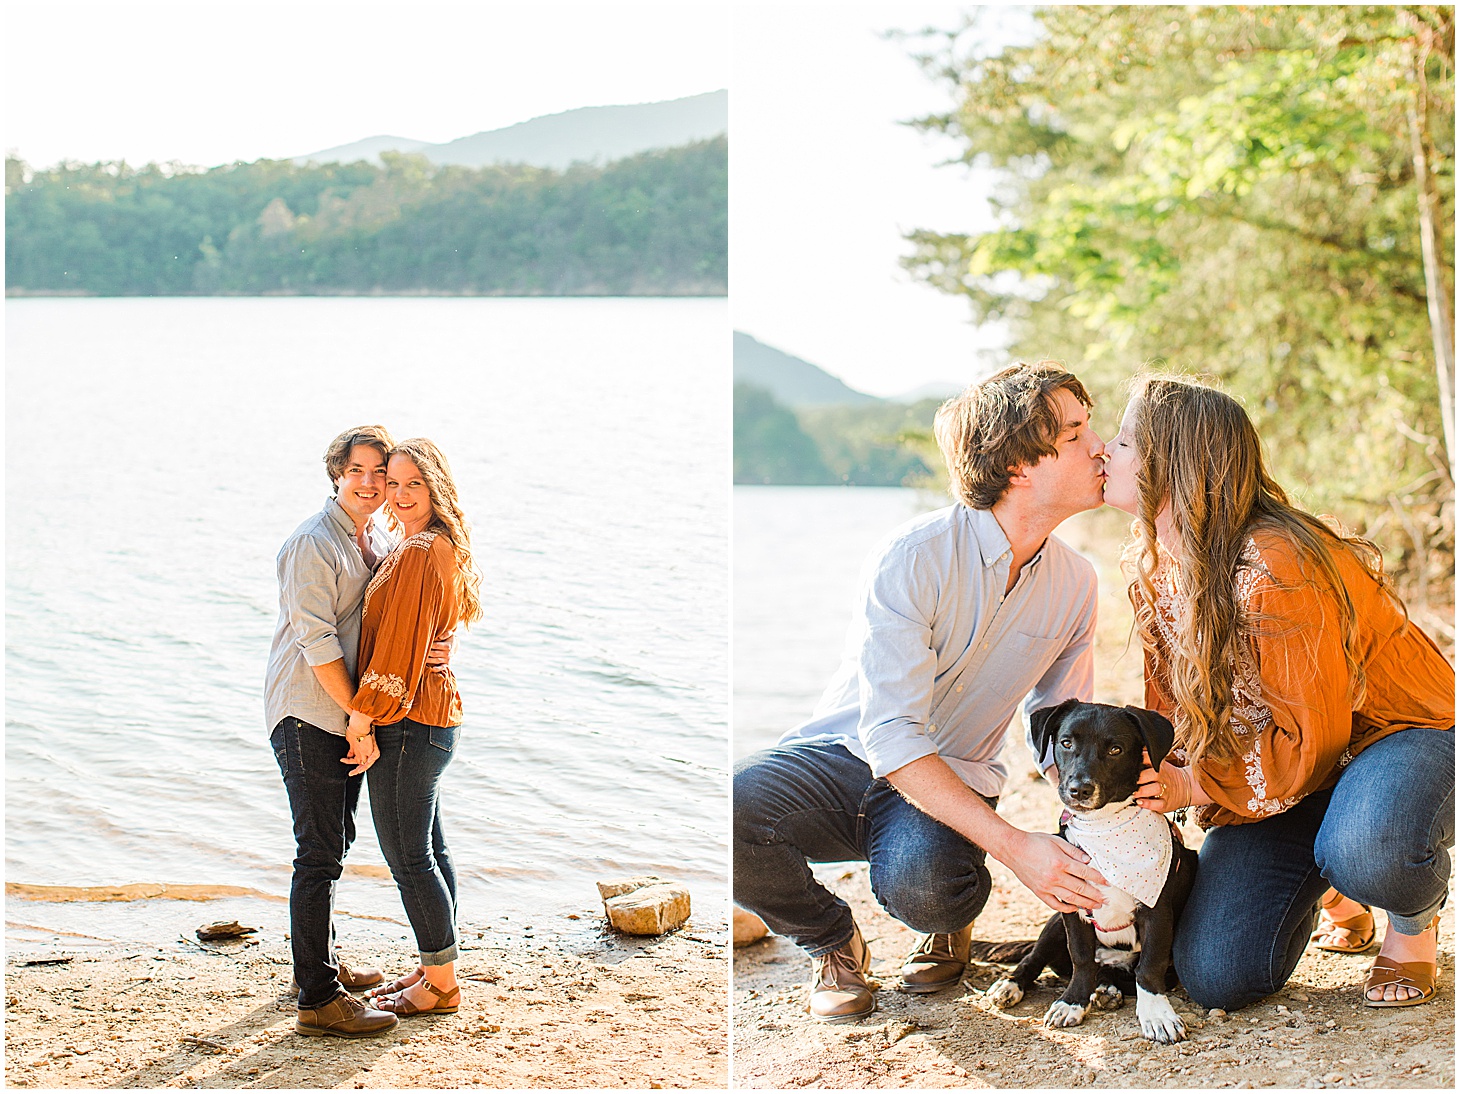 carvinscoveengagementsession_roanokeengagementsession_carvinscove_virginiawedding_virginiaweddingphotographer_vaweddingphotographer_photo_0002.jpg